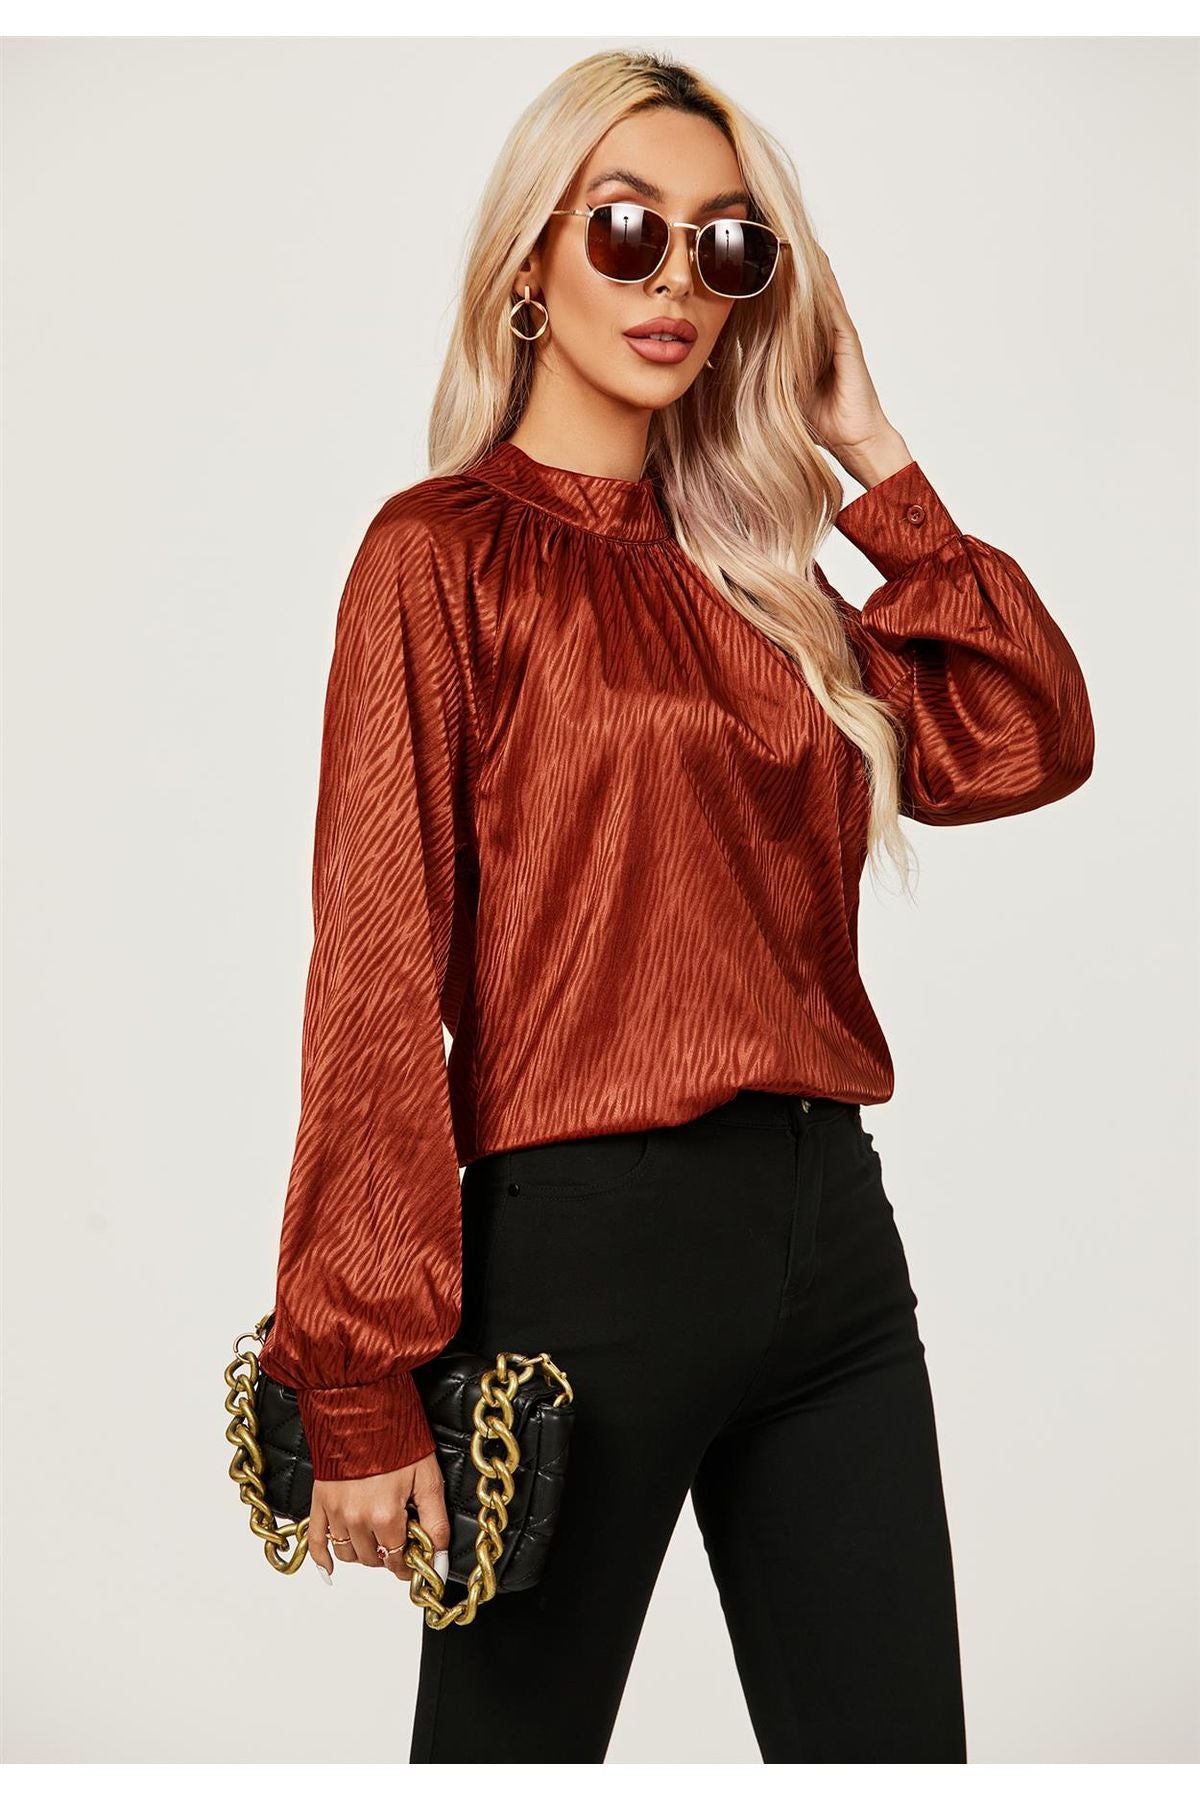 Halter Neck Satin Long Sleeve Blouse Top In Copper Red FS487-CopperRed